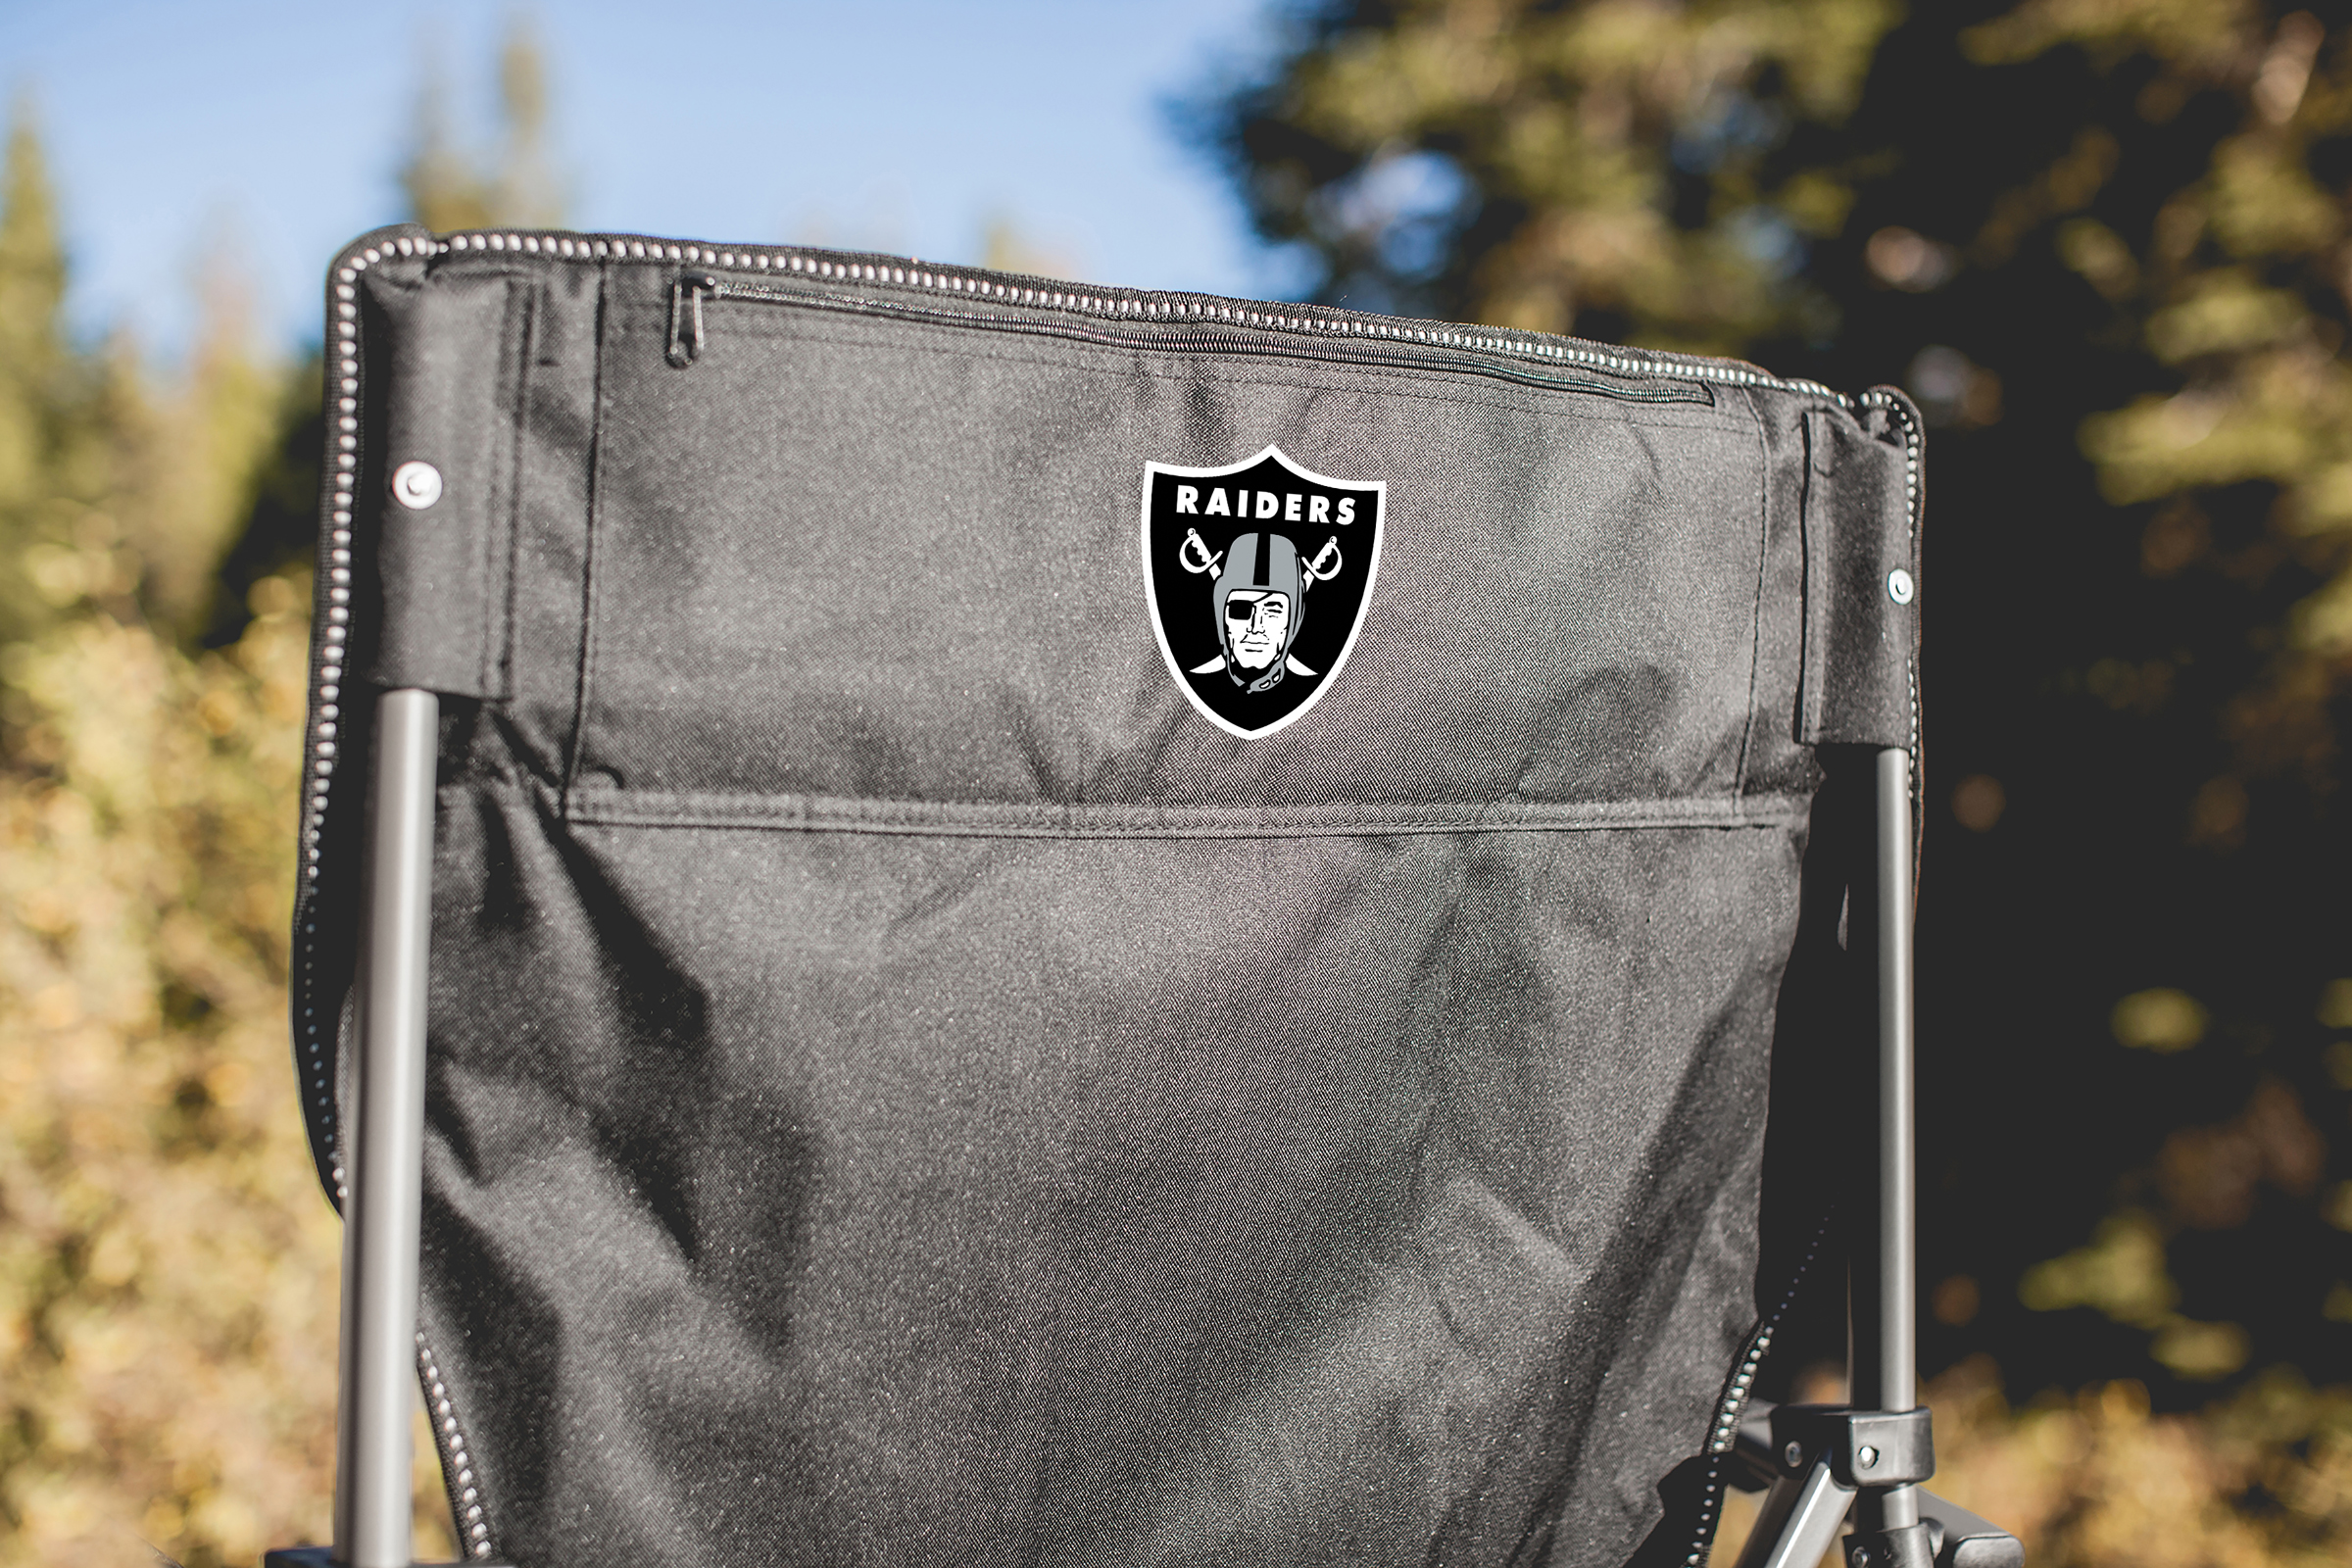 Las Vegas Raiders - Outlander Folding Camping Chair with Cooler